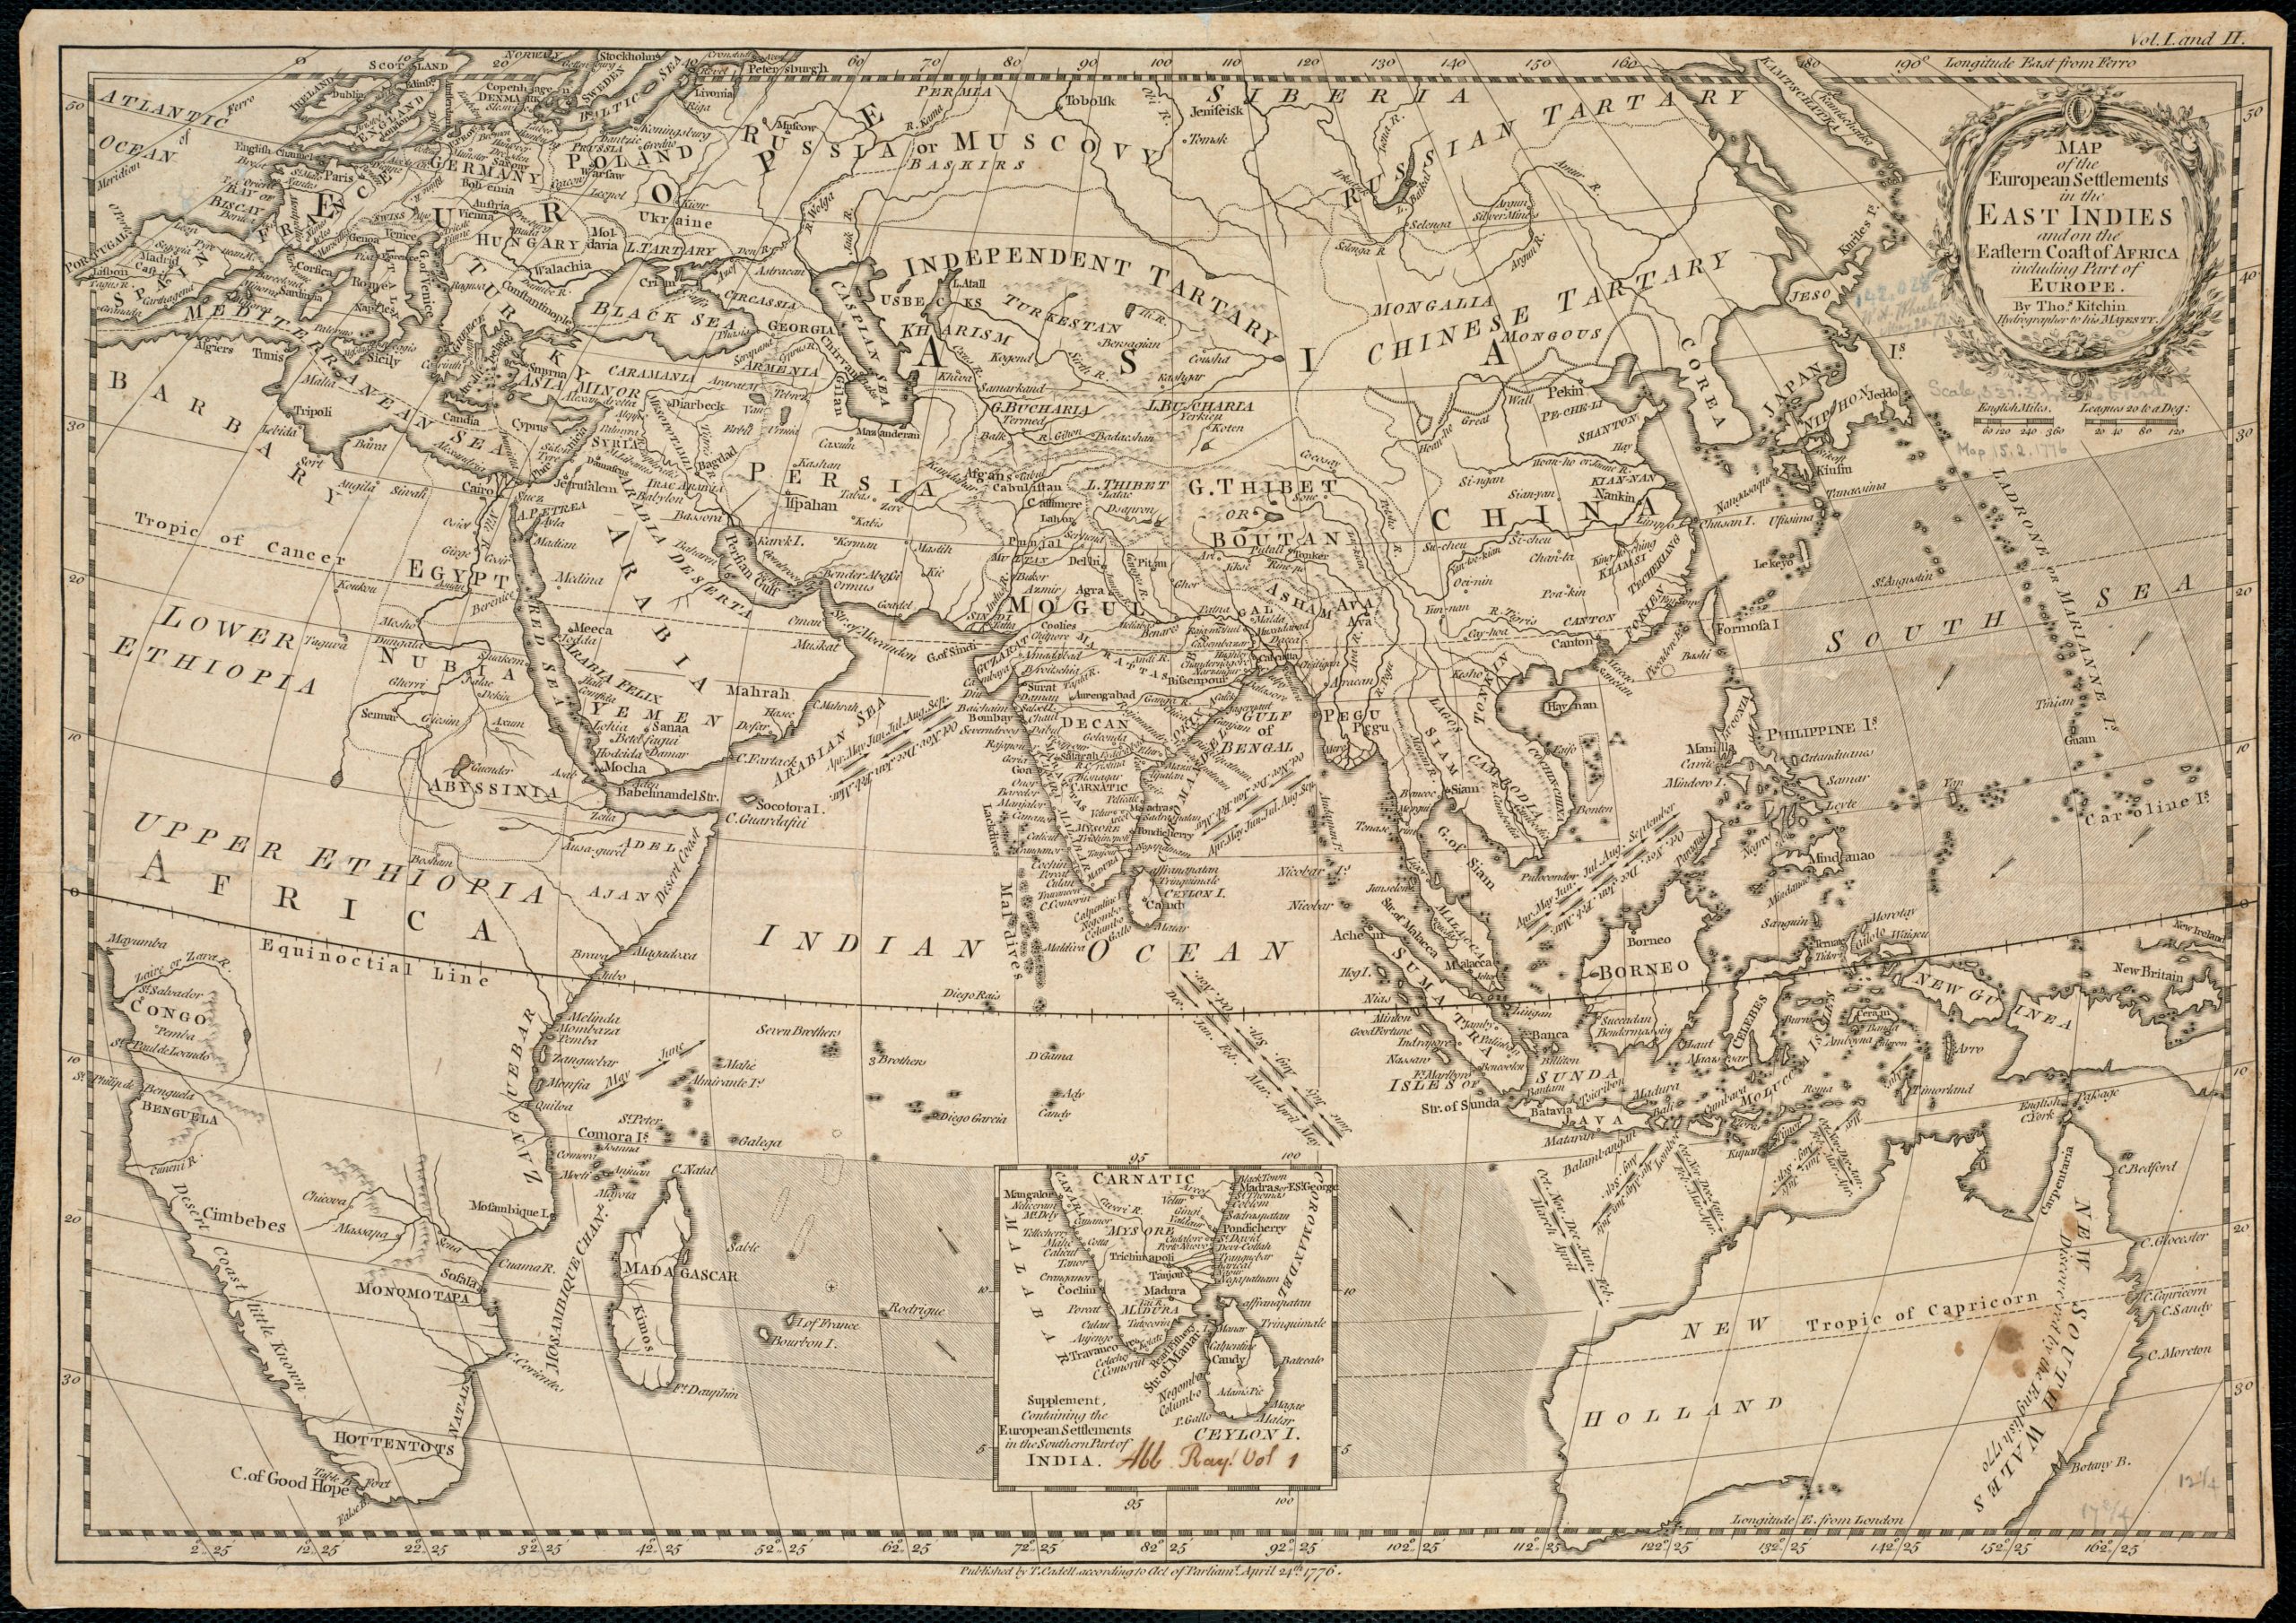 This is a map of the Eastern Hemisphere published in 1776, the same year that Congress adopted the Declaration of Independence.